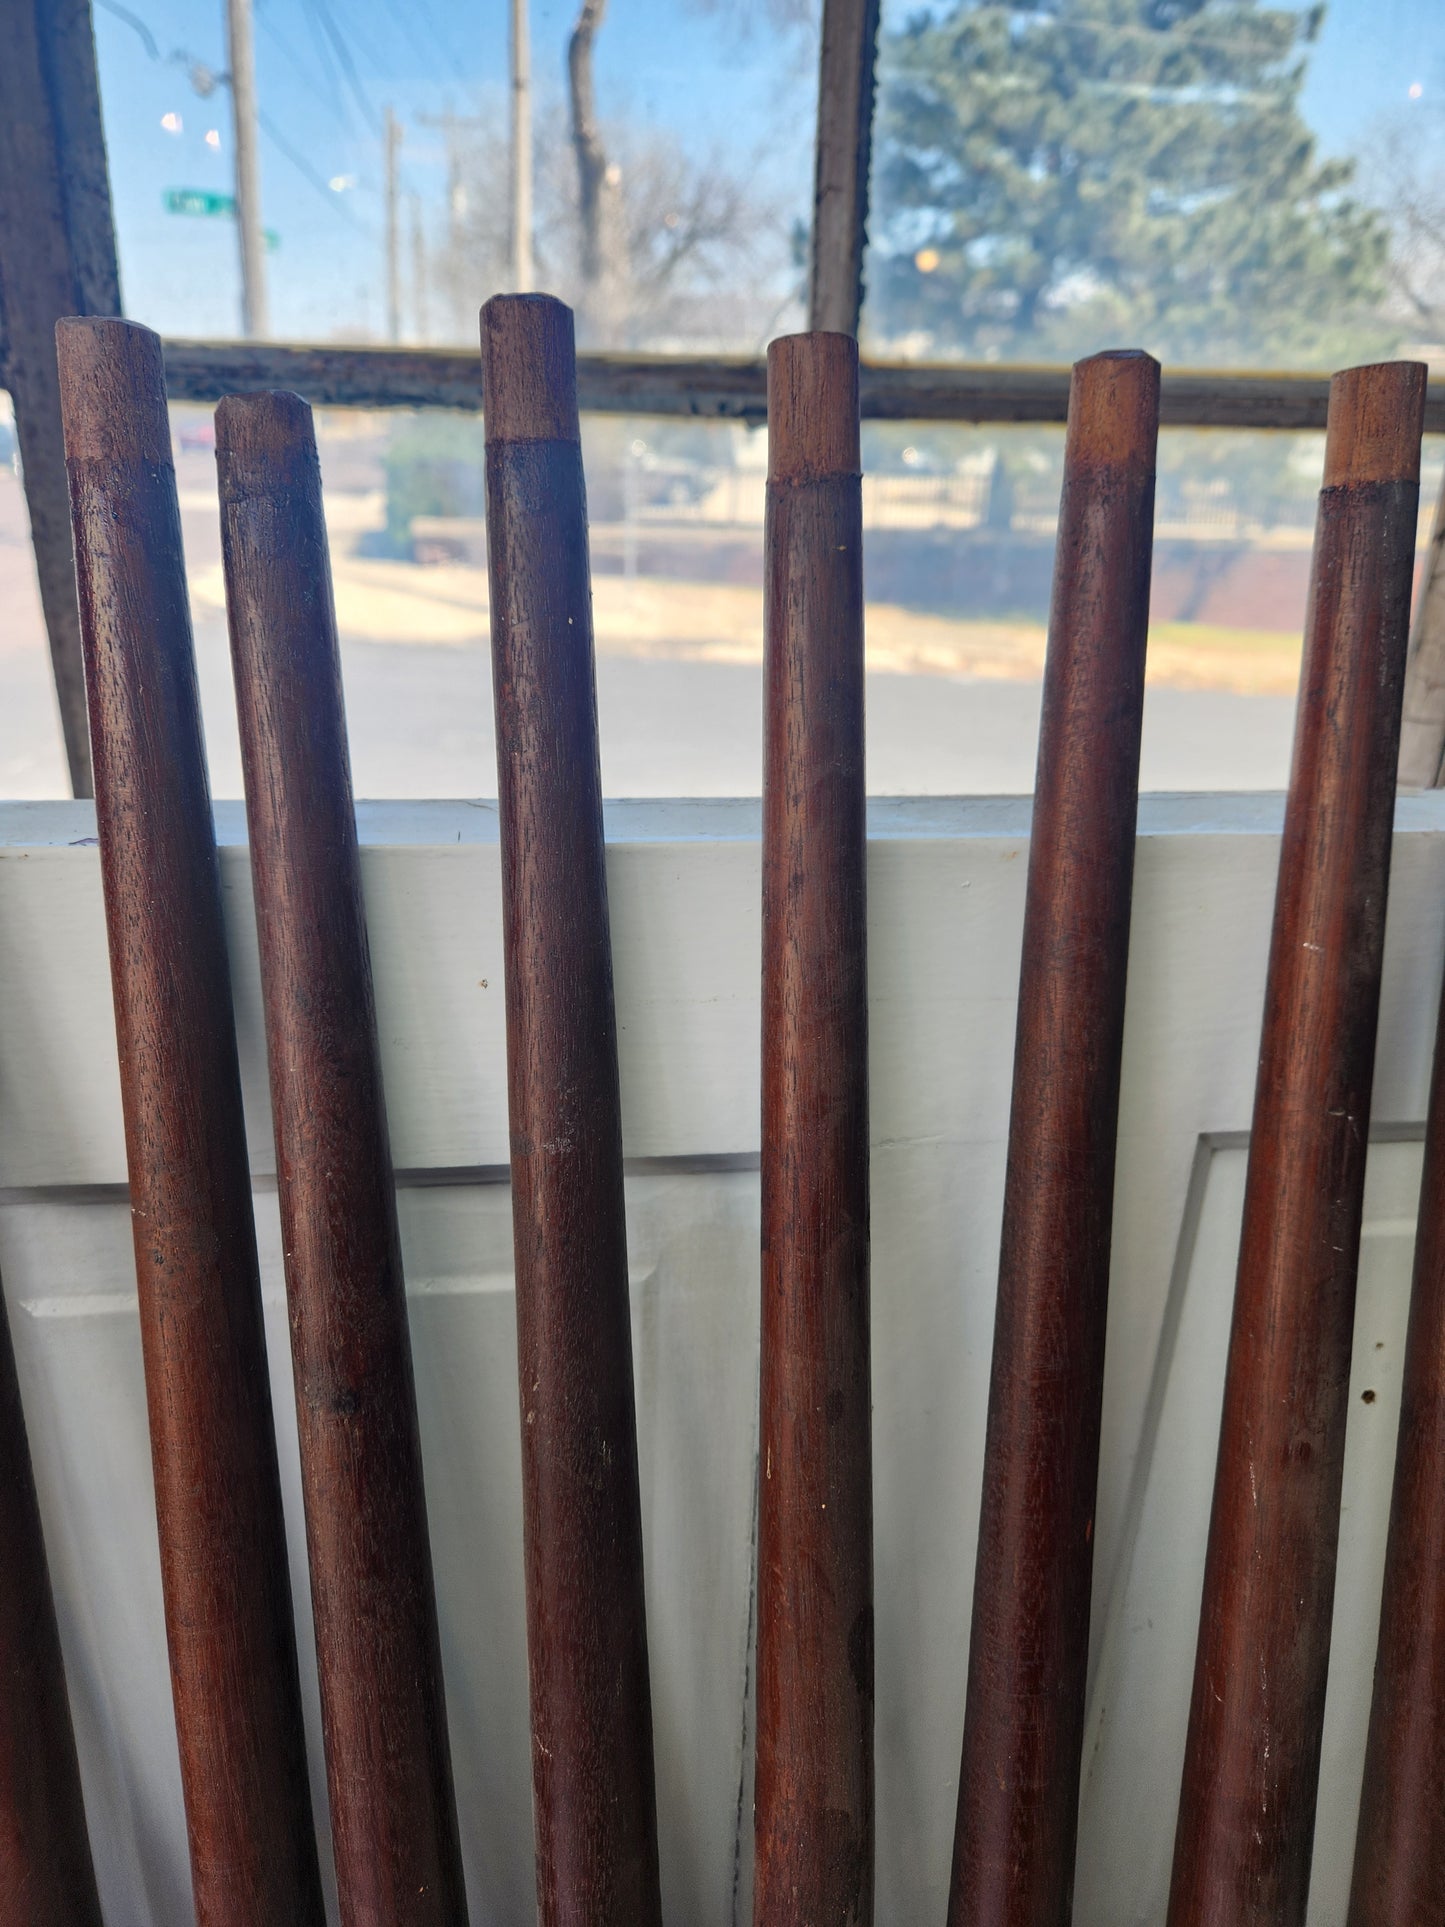 17 Matching Antique Stair Spindles, Set of 17 Turned Wood Staircase Balusters #032805